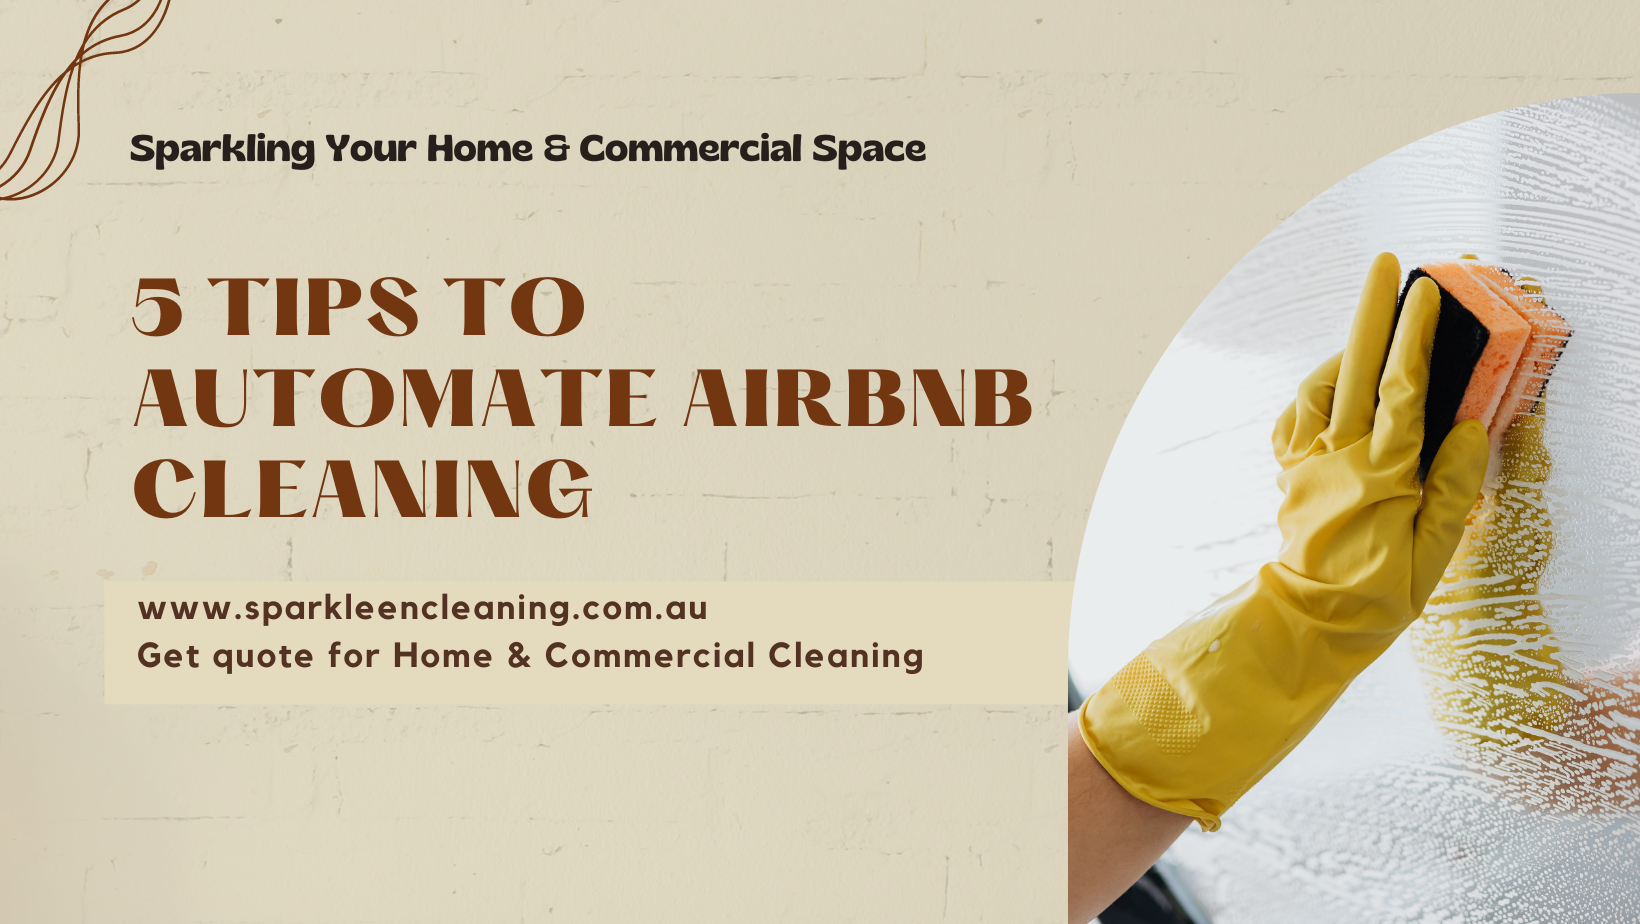 5 Tips to Automate Airbnb Cleaning